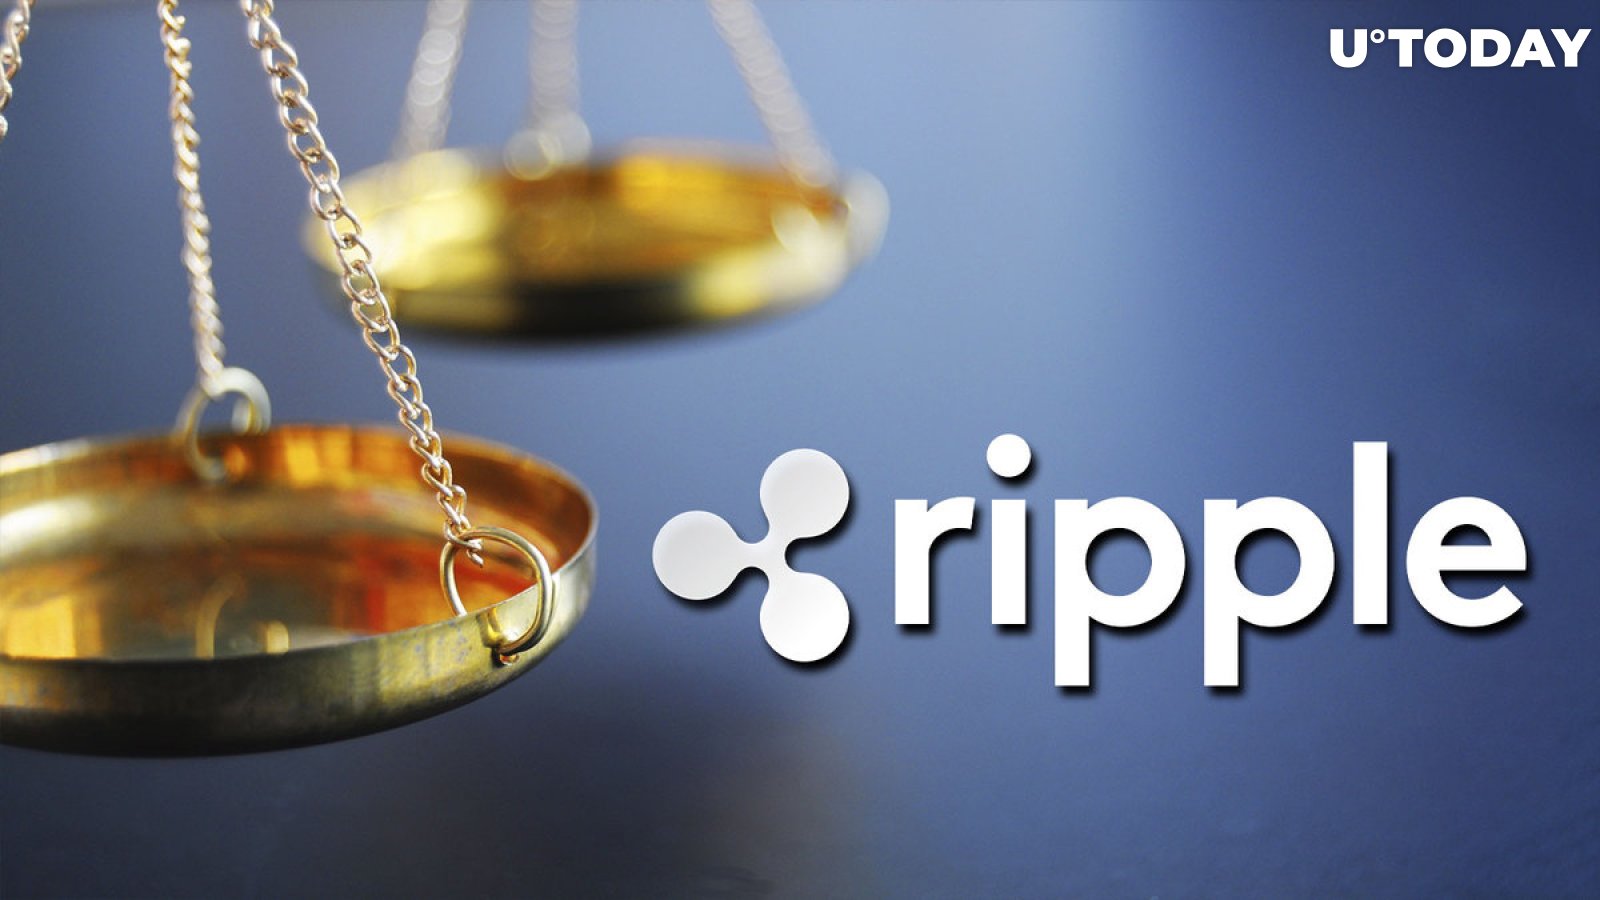 Ripple Lawsuit Resolution Would Be Epic for Crypto, Capital Venture Founder Predicts